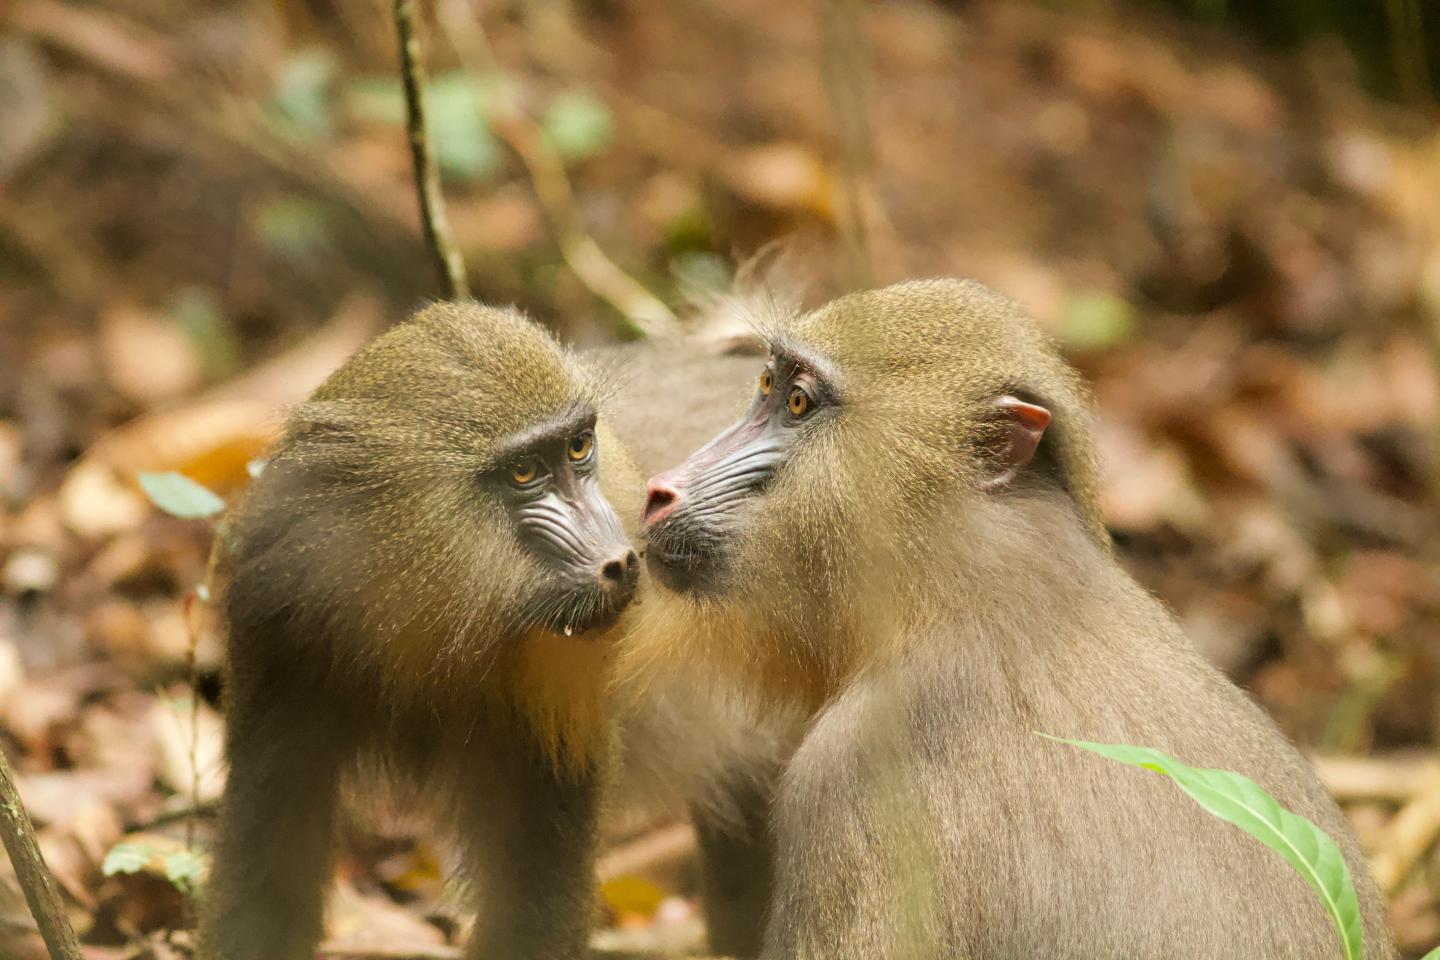 Is the Similarity of Facial Features in Mandrills a Consequence of Selection?